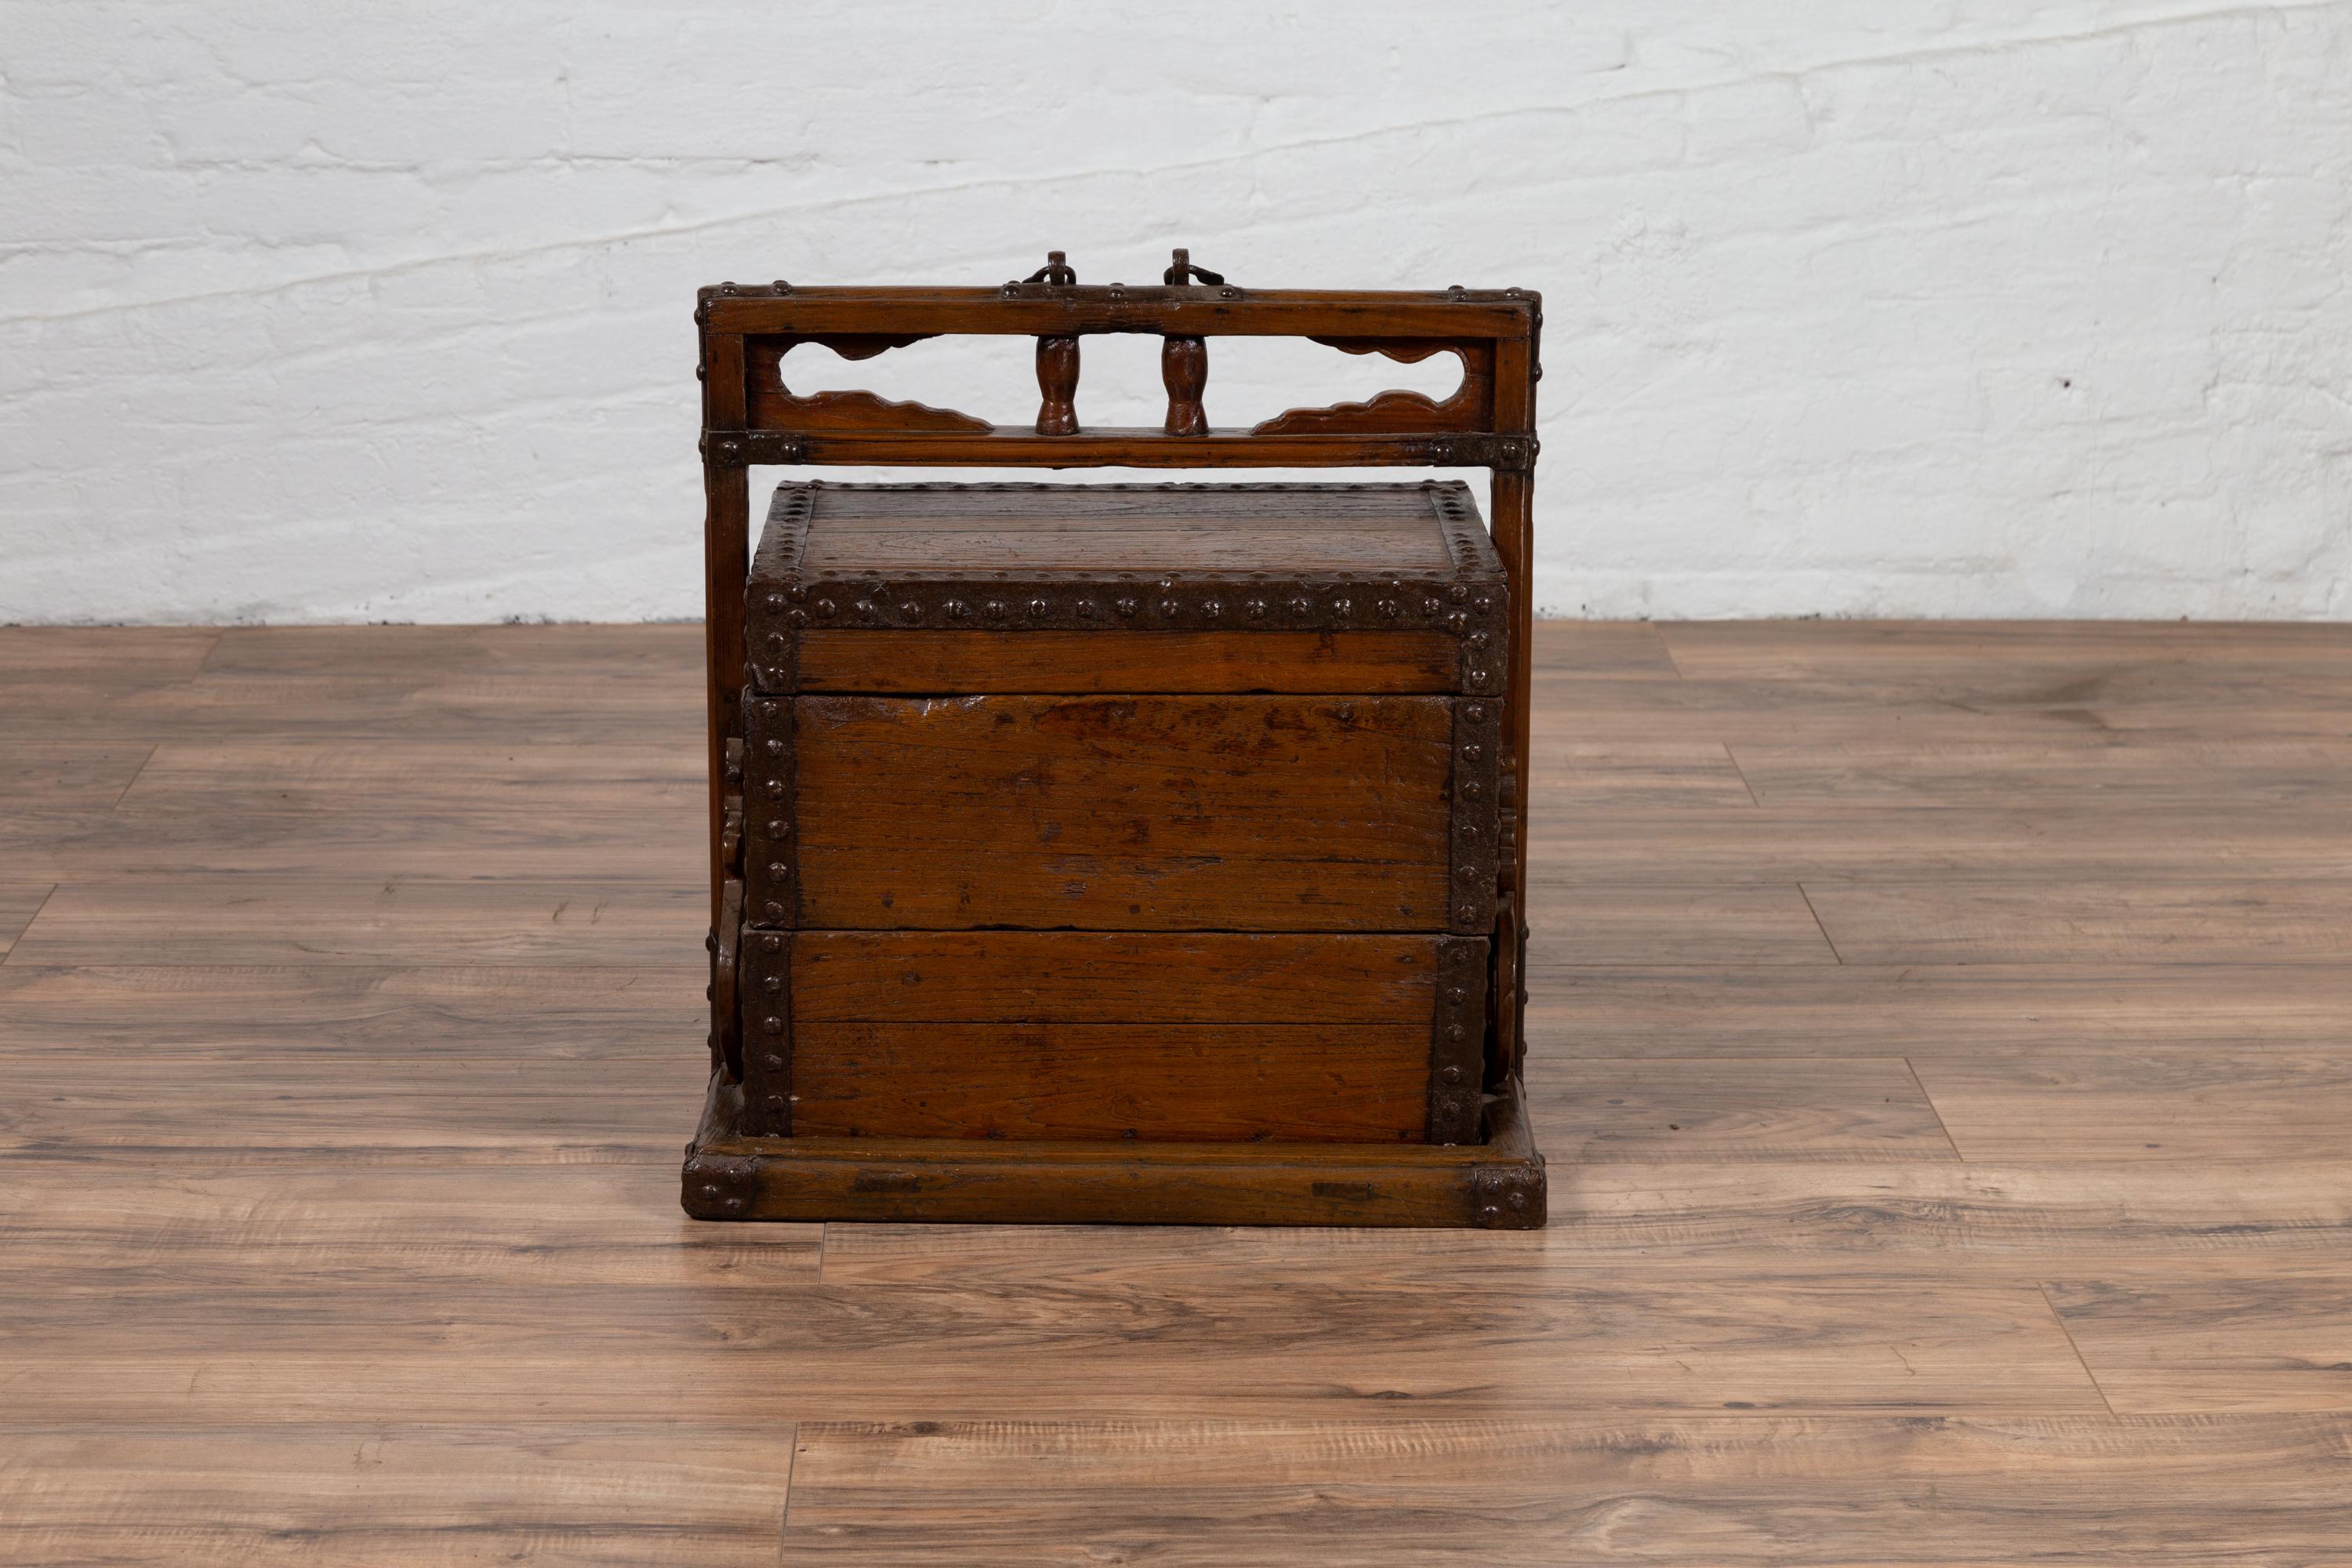 An antique Chinese wooden wedding carrying treasure box from the early 20th century, with large handle and nailheads. Born in China during the early years of the 20th century, this charming wedding box features a linear silhouette, perfect accented